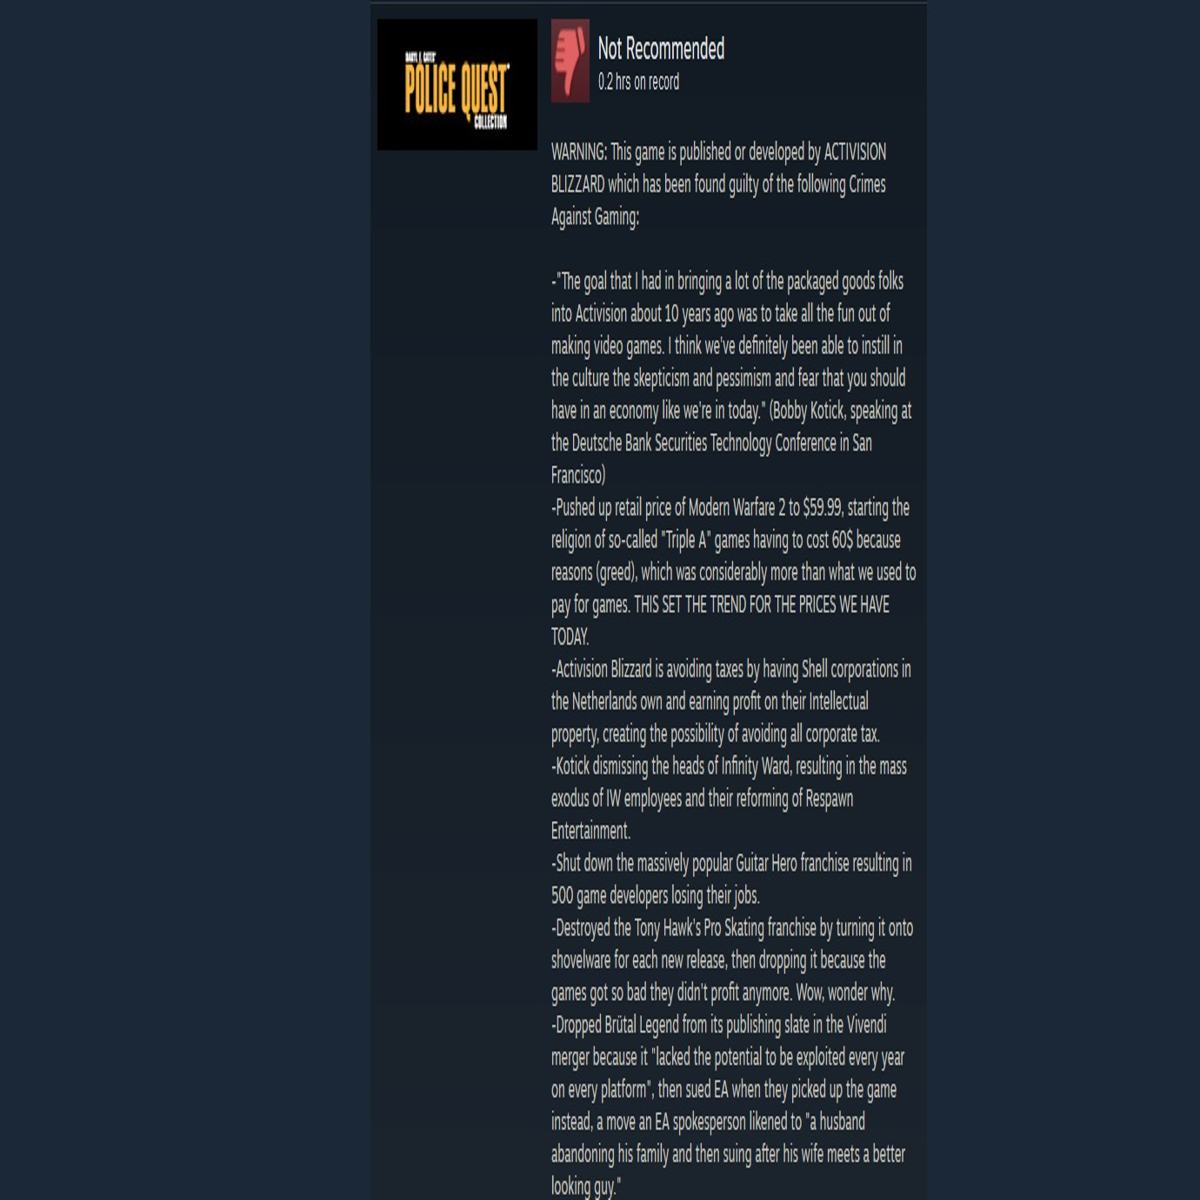 Implying video games are fun - post your steam reviews, or just